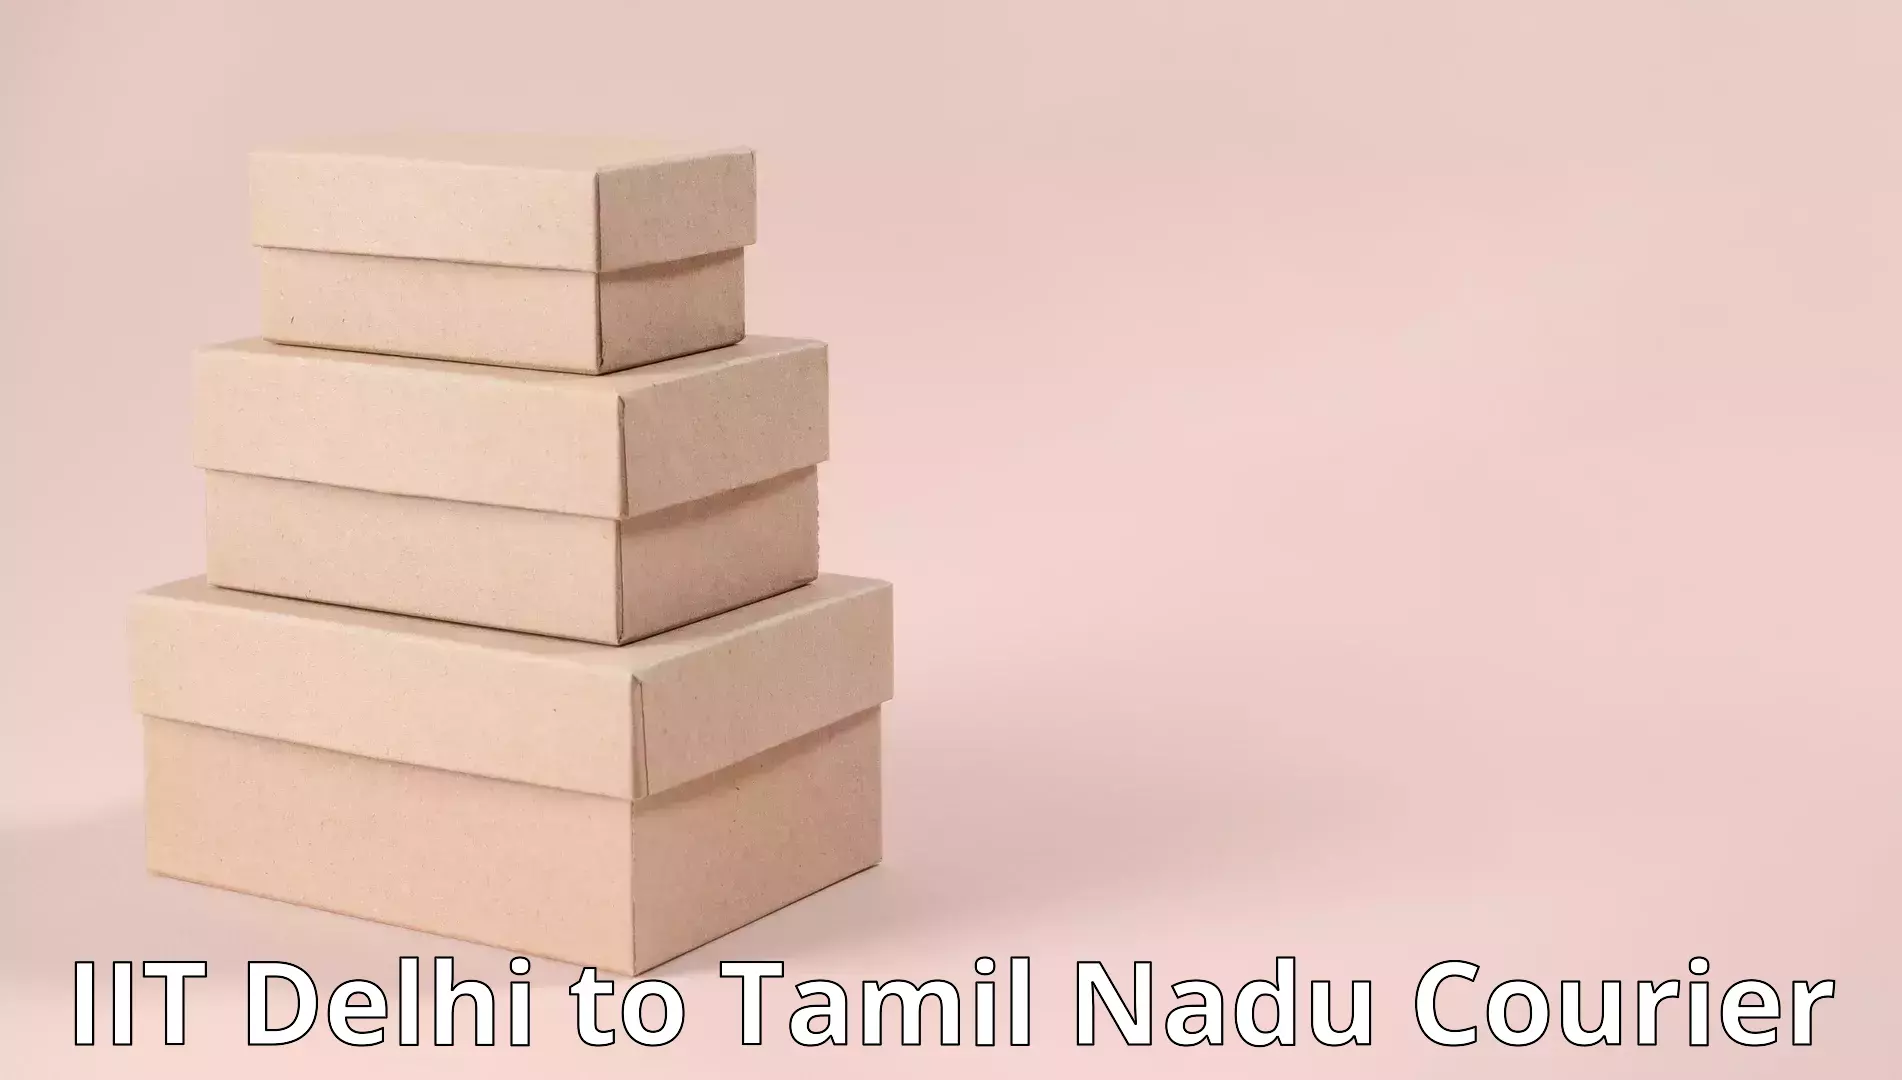 Cost-effective moving options IIT Delhi to Tamil Nadu